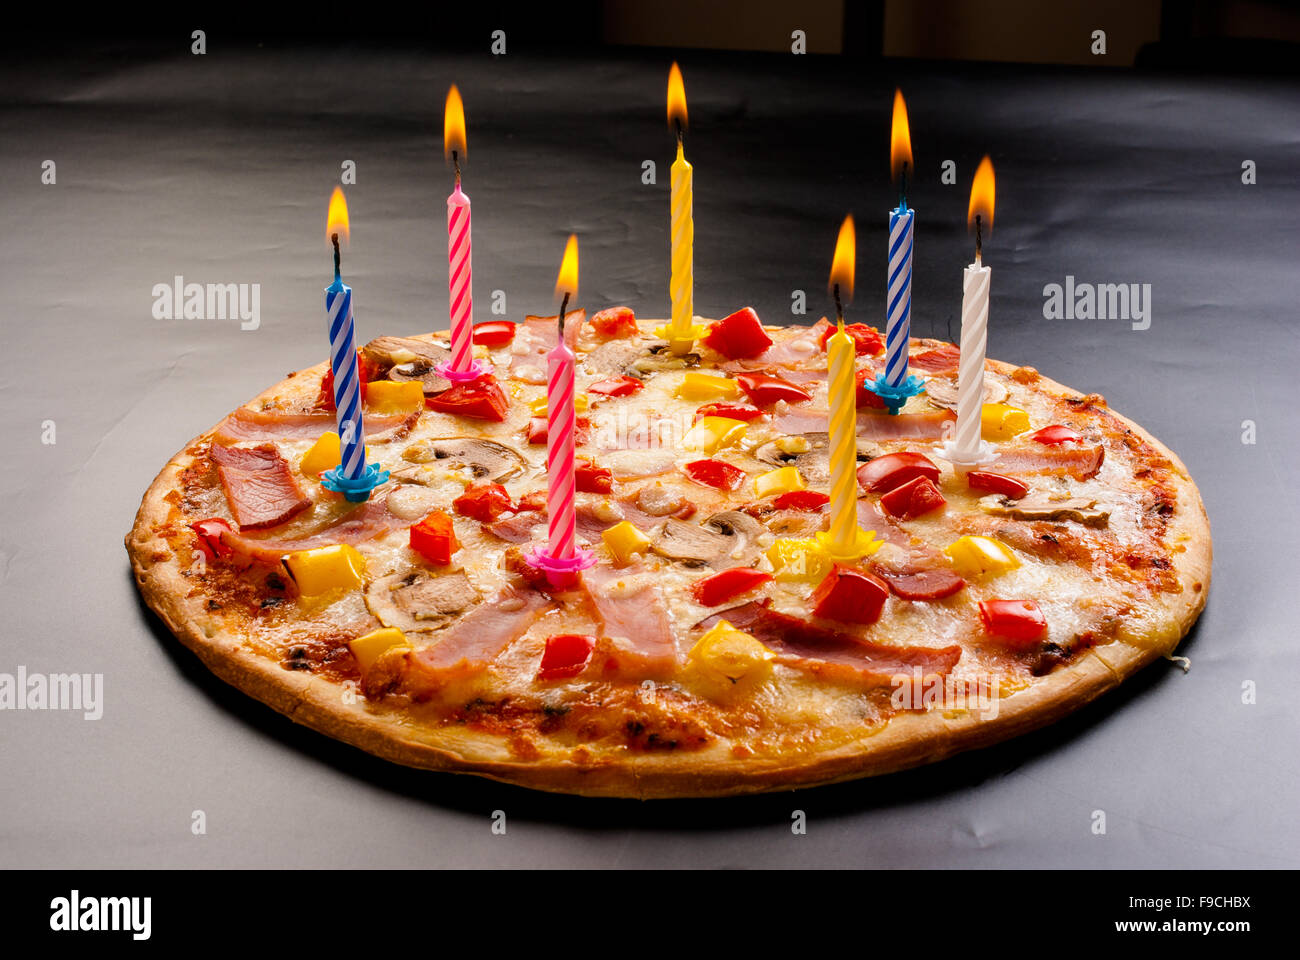 Festive candles pizza with mushrooms, cauliflower, olives, cheese and sweet pepper Stock Photo